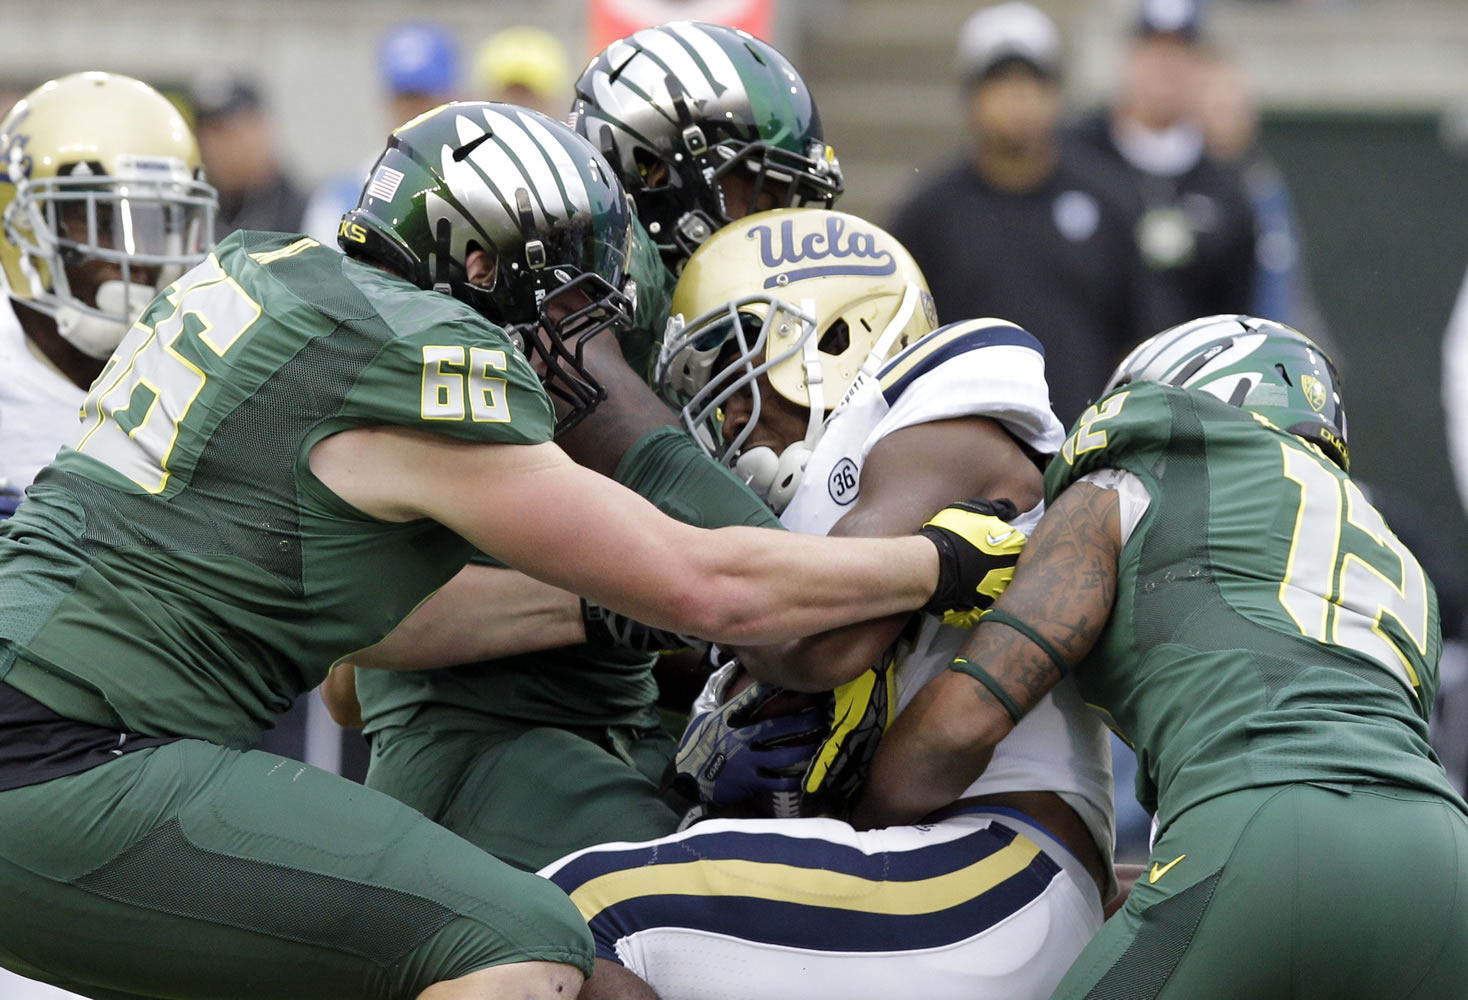 UCLA running back Paul Perkins, middle, is wrapped up by Oregon defenders Taylor Hart, left, and Brian Jackson during the first half of an NCAA college football game in Eugene, Ore., Saturday, Oct. 26, 2013.